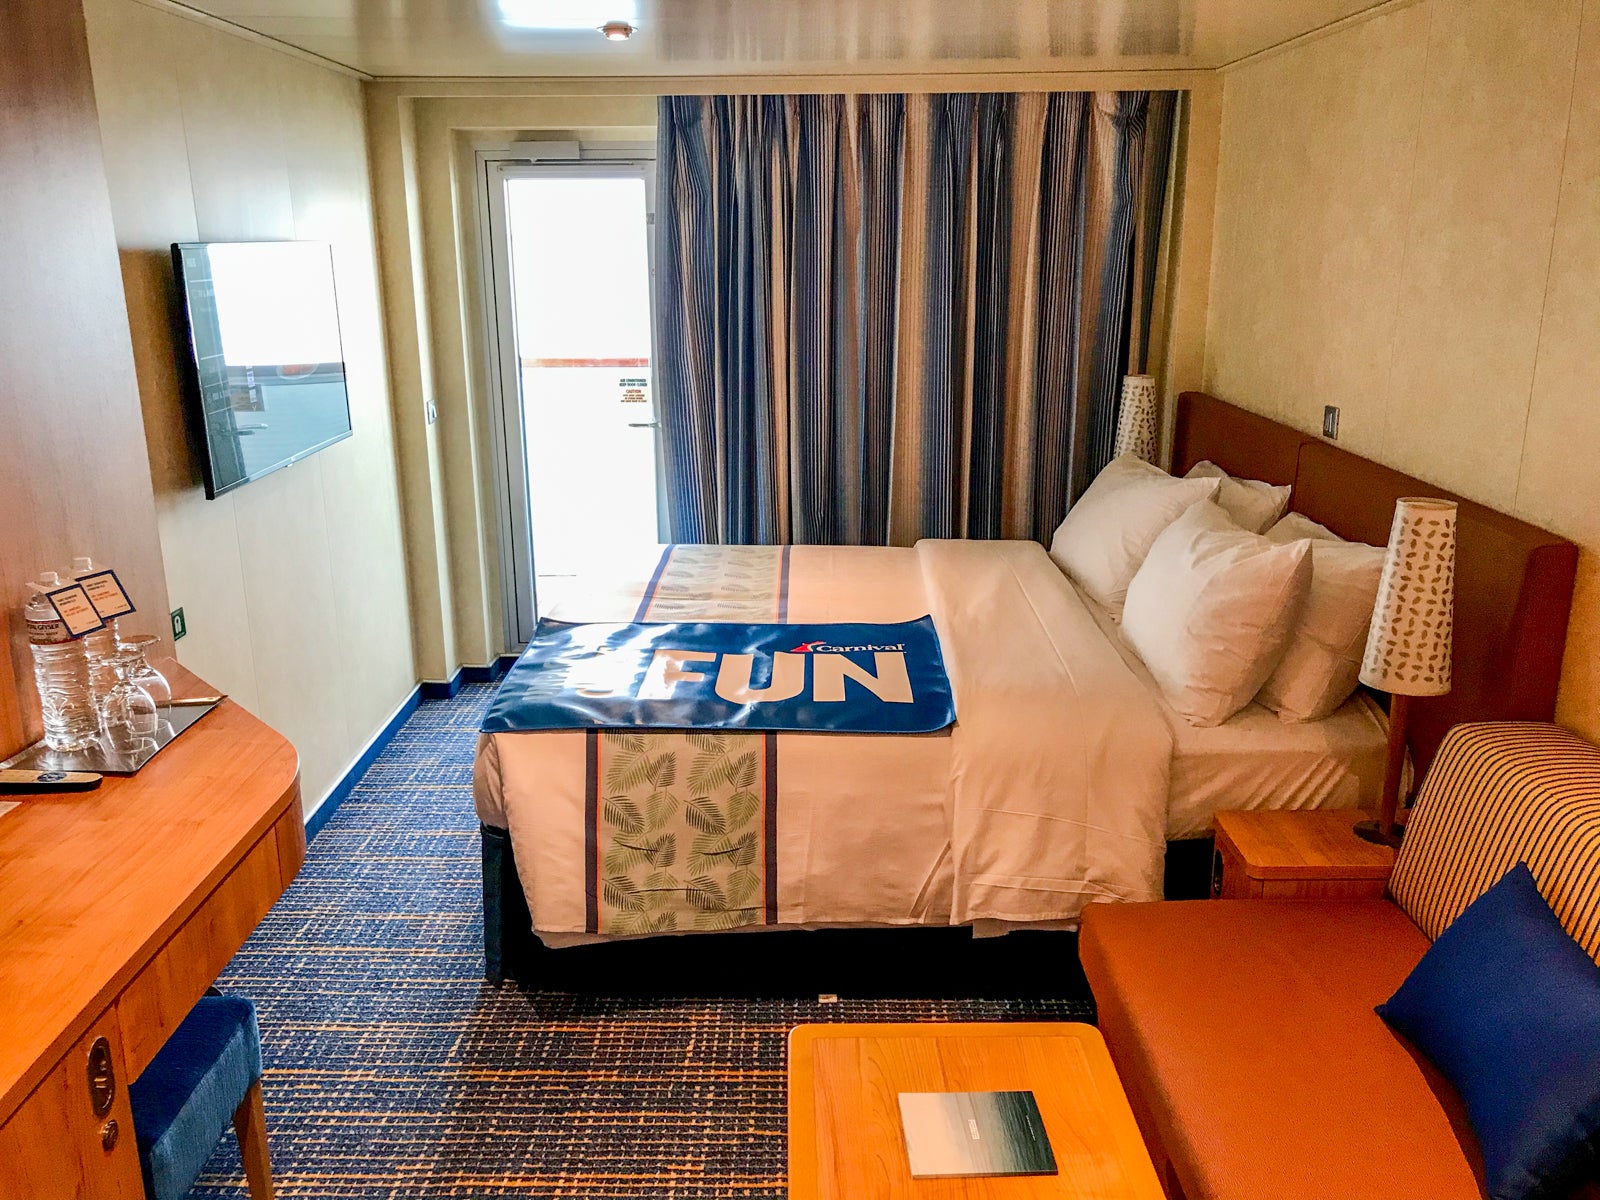 carnival cruise rooms